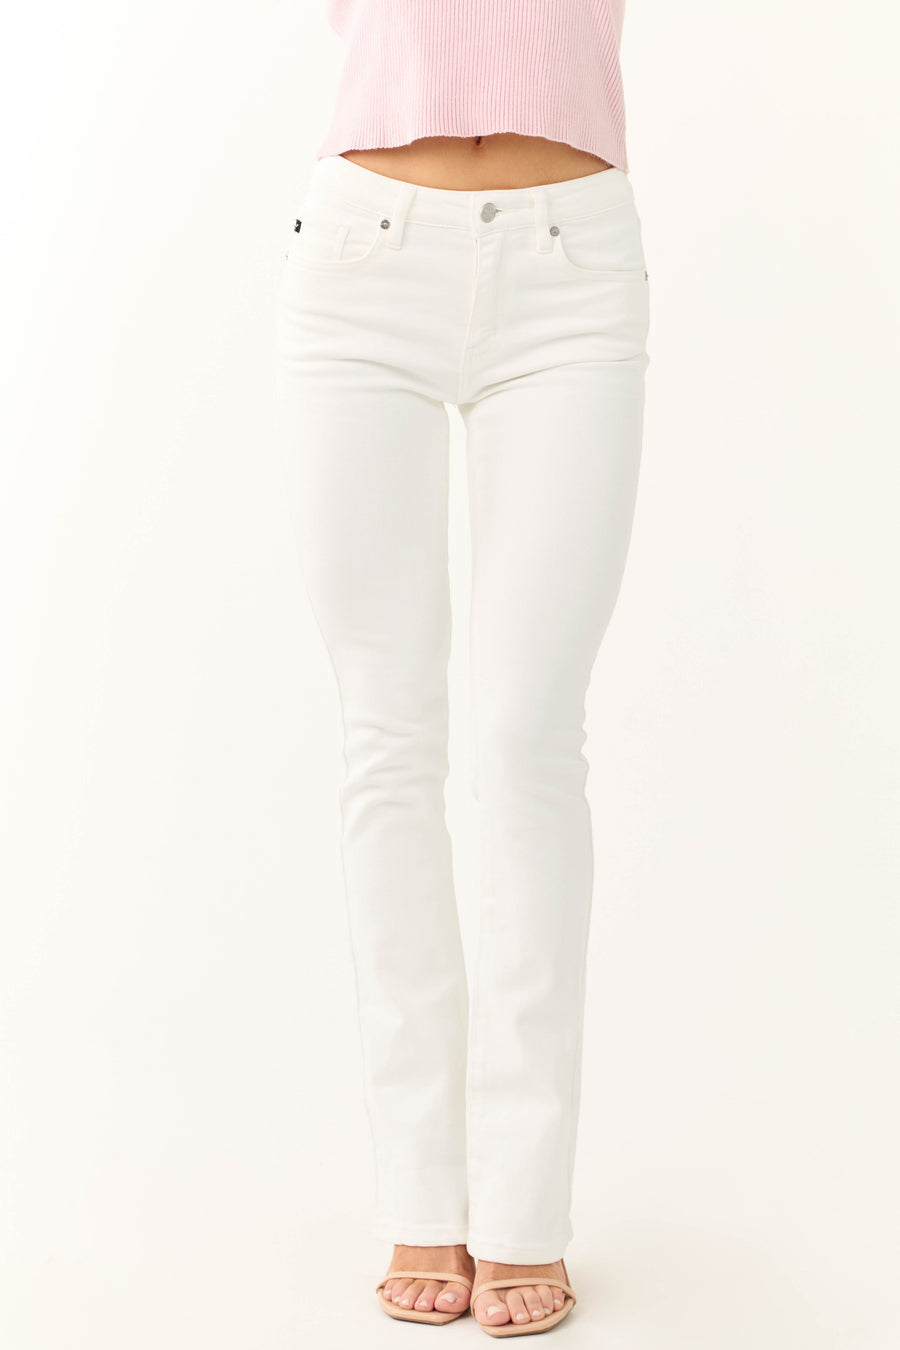 KanCan Off White High Rise Bootcut Jeans